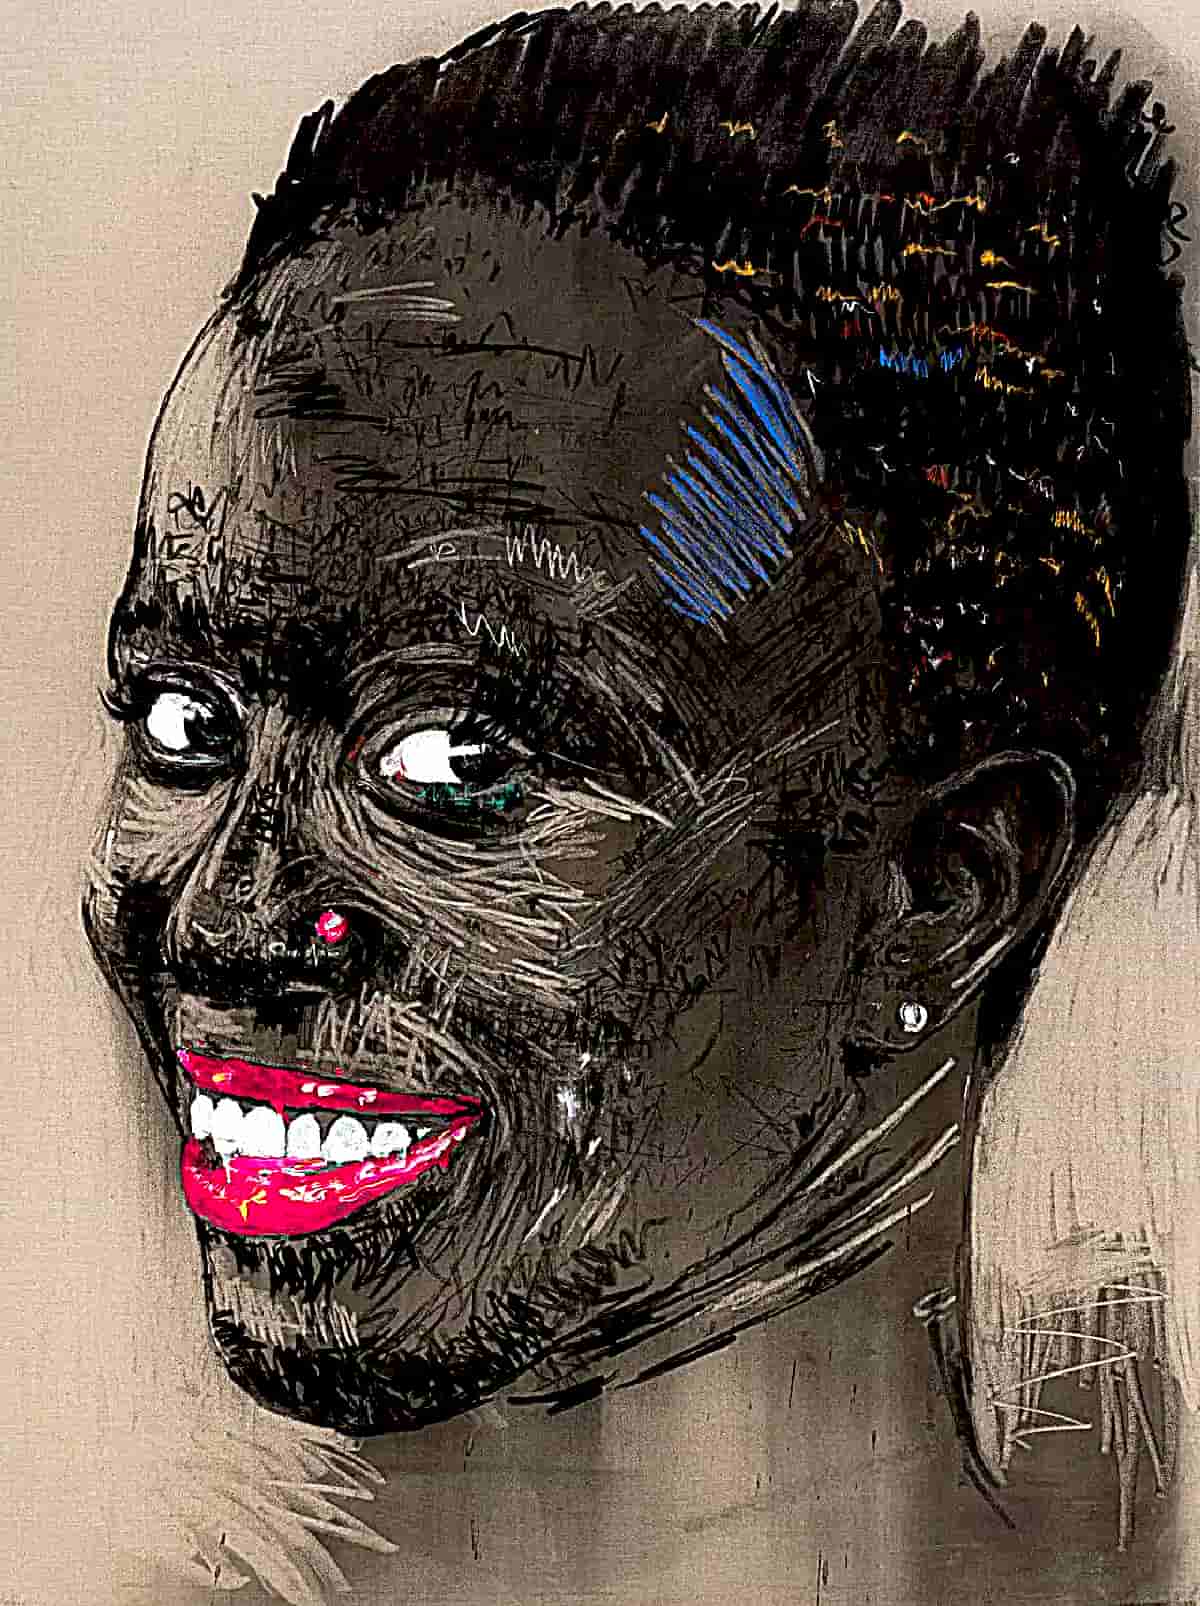 Energetic markings in charcoal delineate Nelson Makamo’s charismatic rendered in lively, gestural lines of charcoal candid portraits of childhood joy